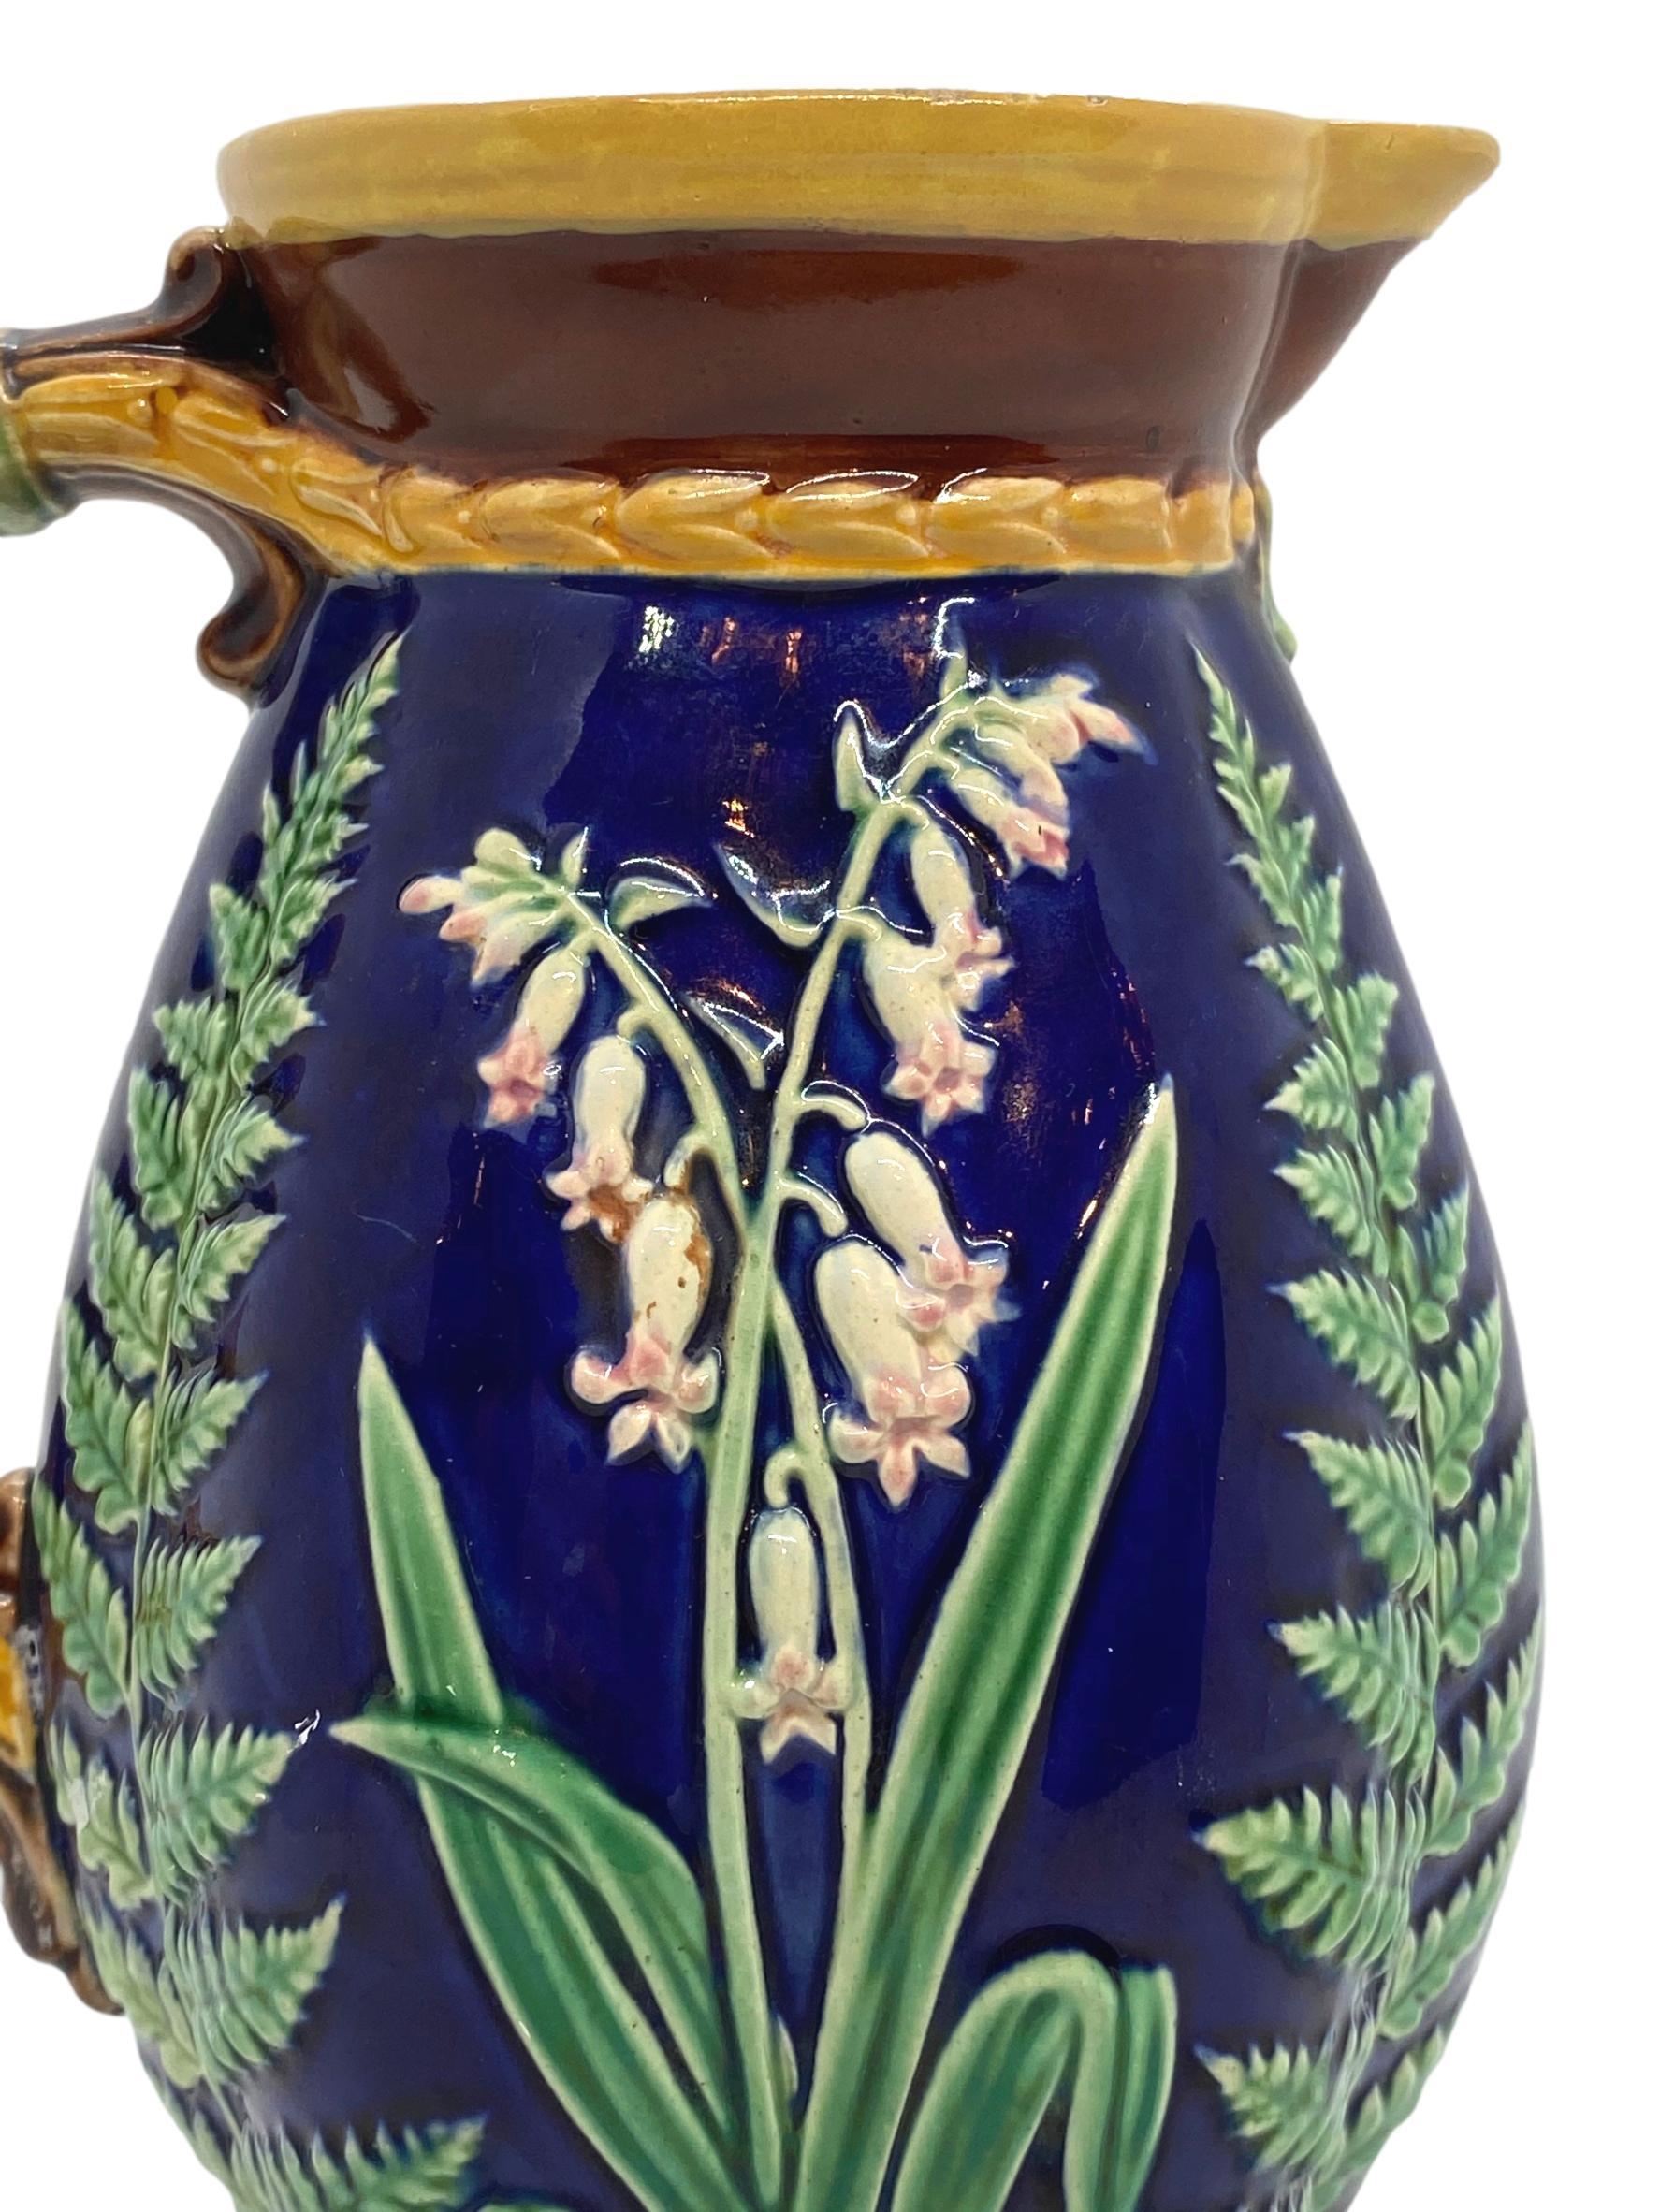 Molded Brown-Westhead Moore Majolica Pitcher Lilies of the Valley and Ferns on Cobalt